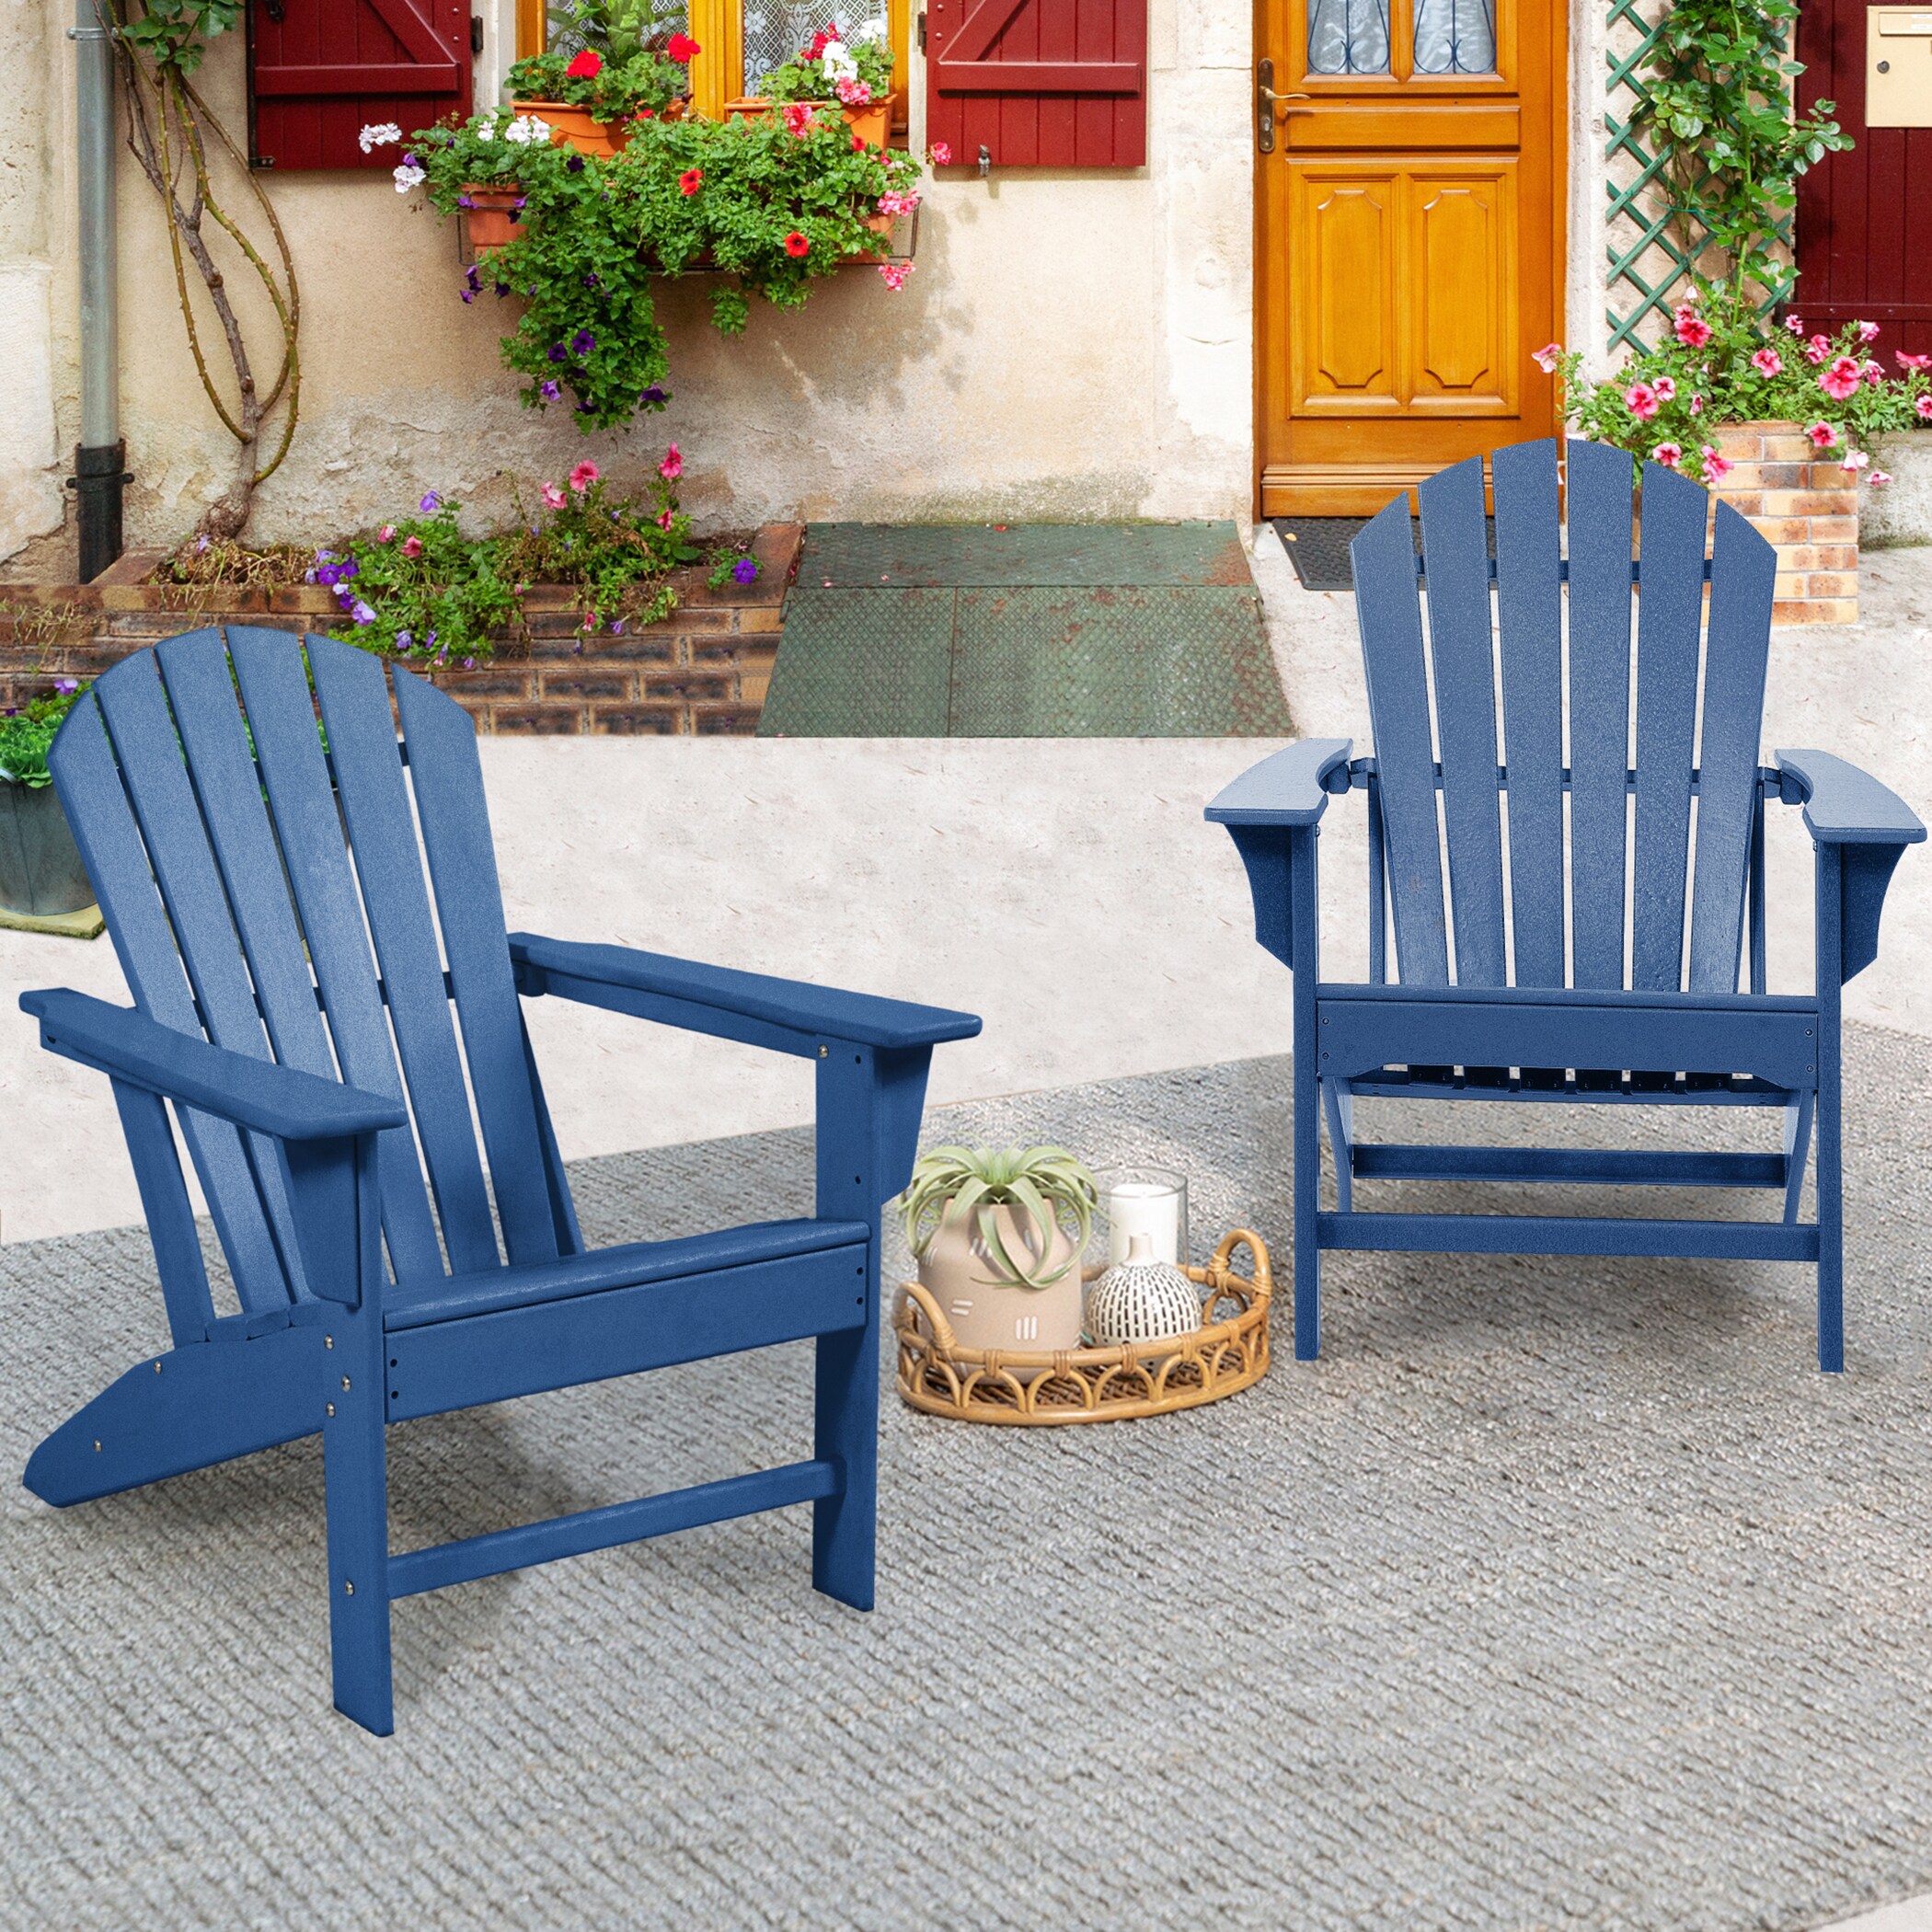 FOREST HOME Adirondack Patio Chairs at Lowes.com